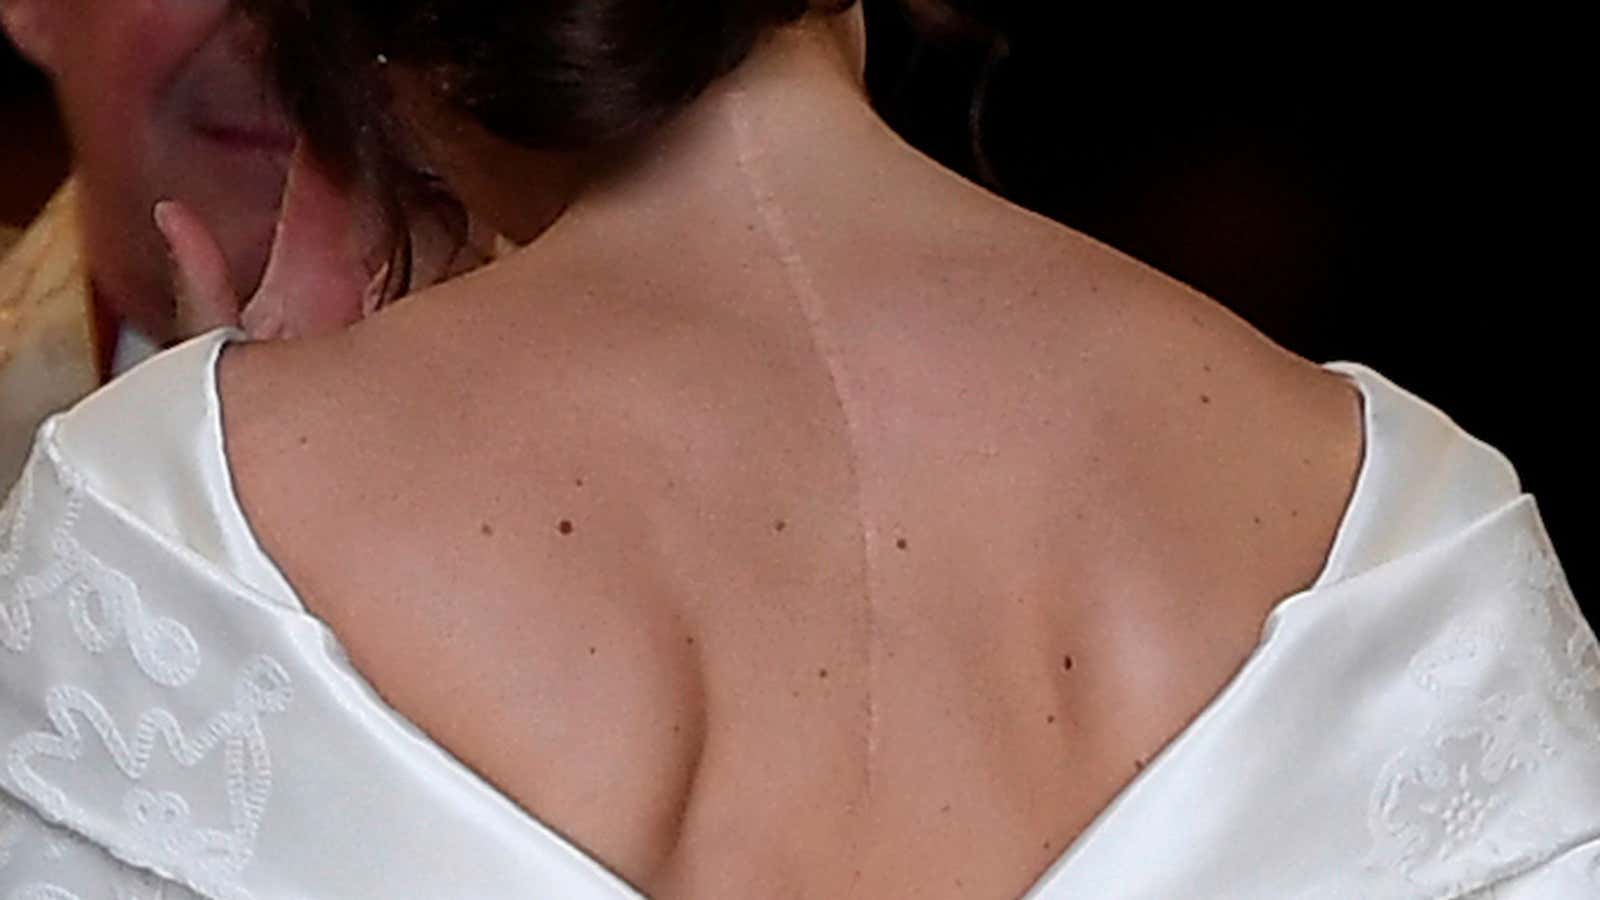 Princess Eugenie wanted wedding dress to show scoliosis back scar